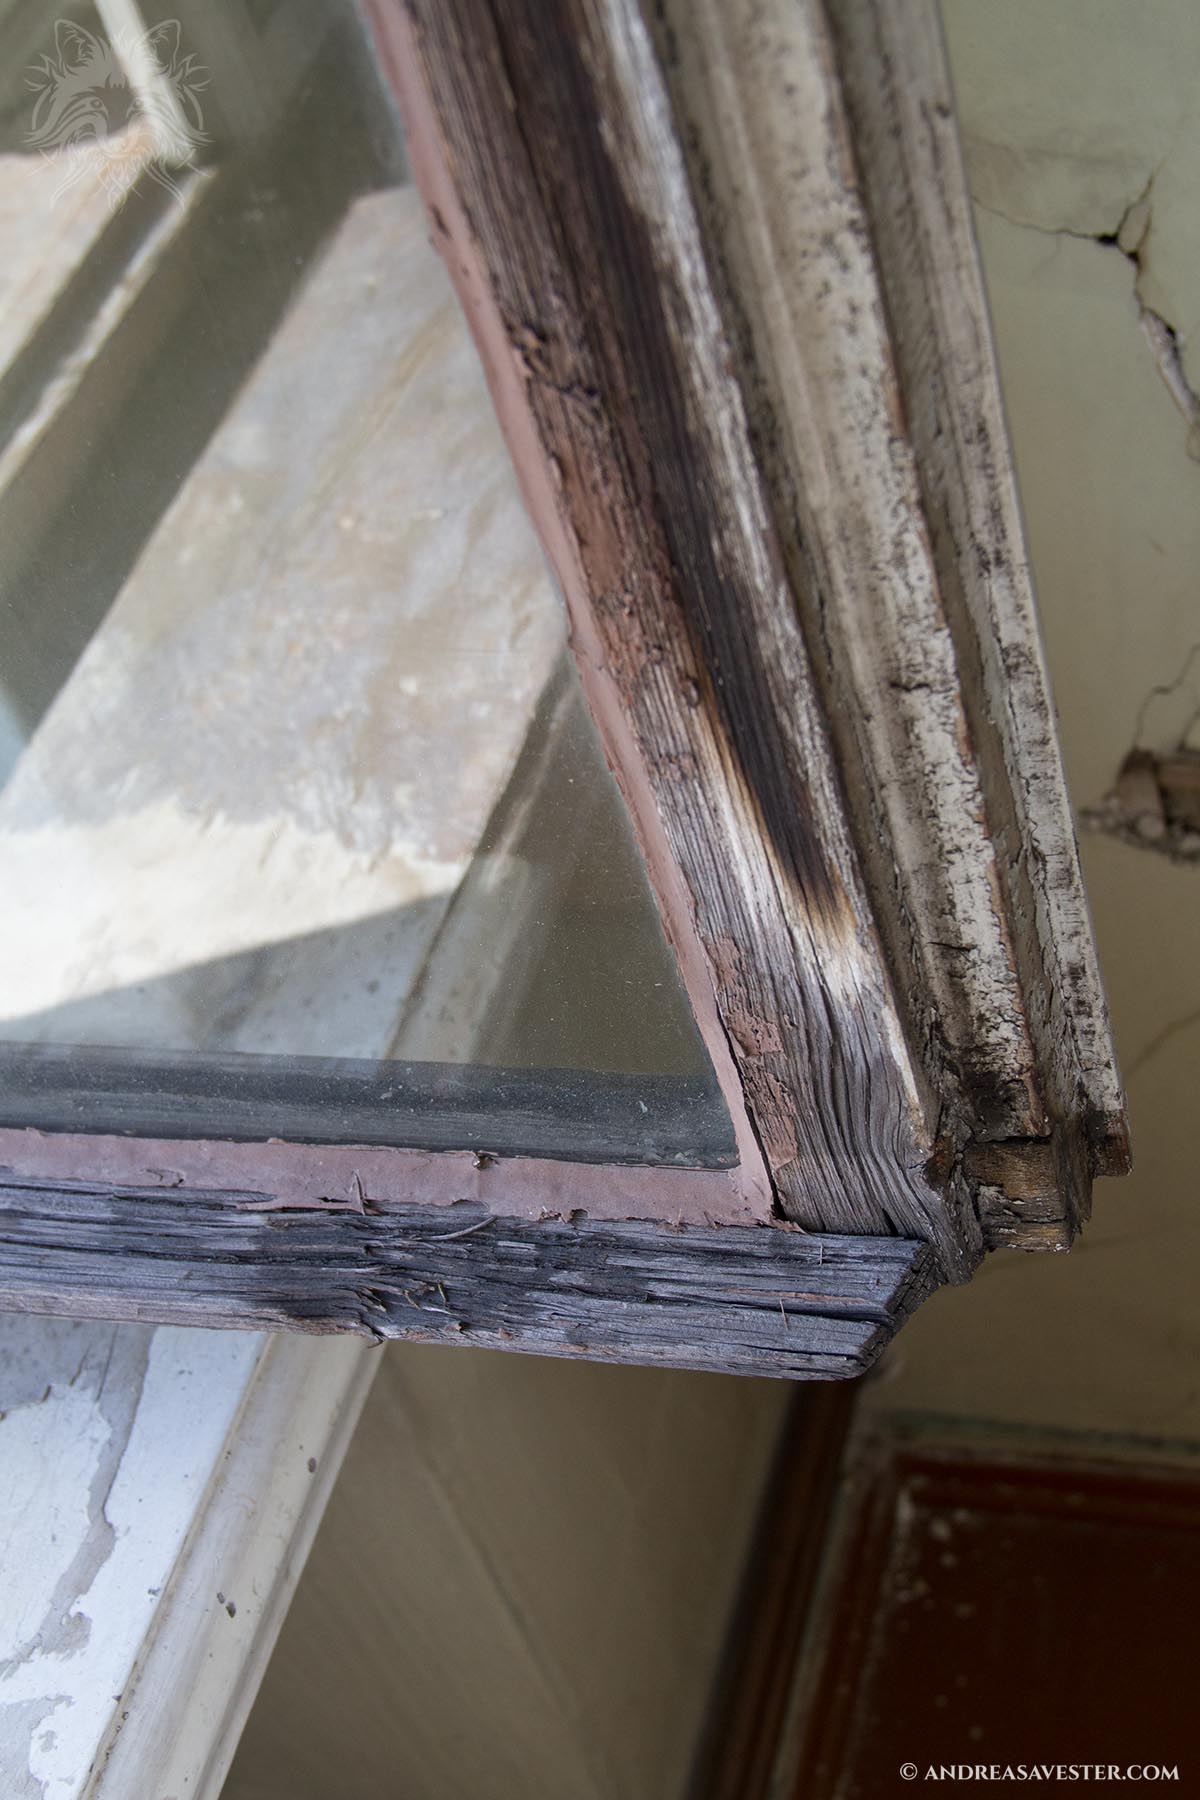 Repairing Old Wood Windows — Glazing, Painting, and Weather